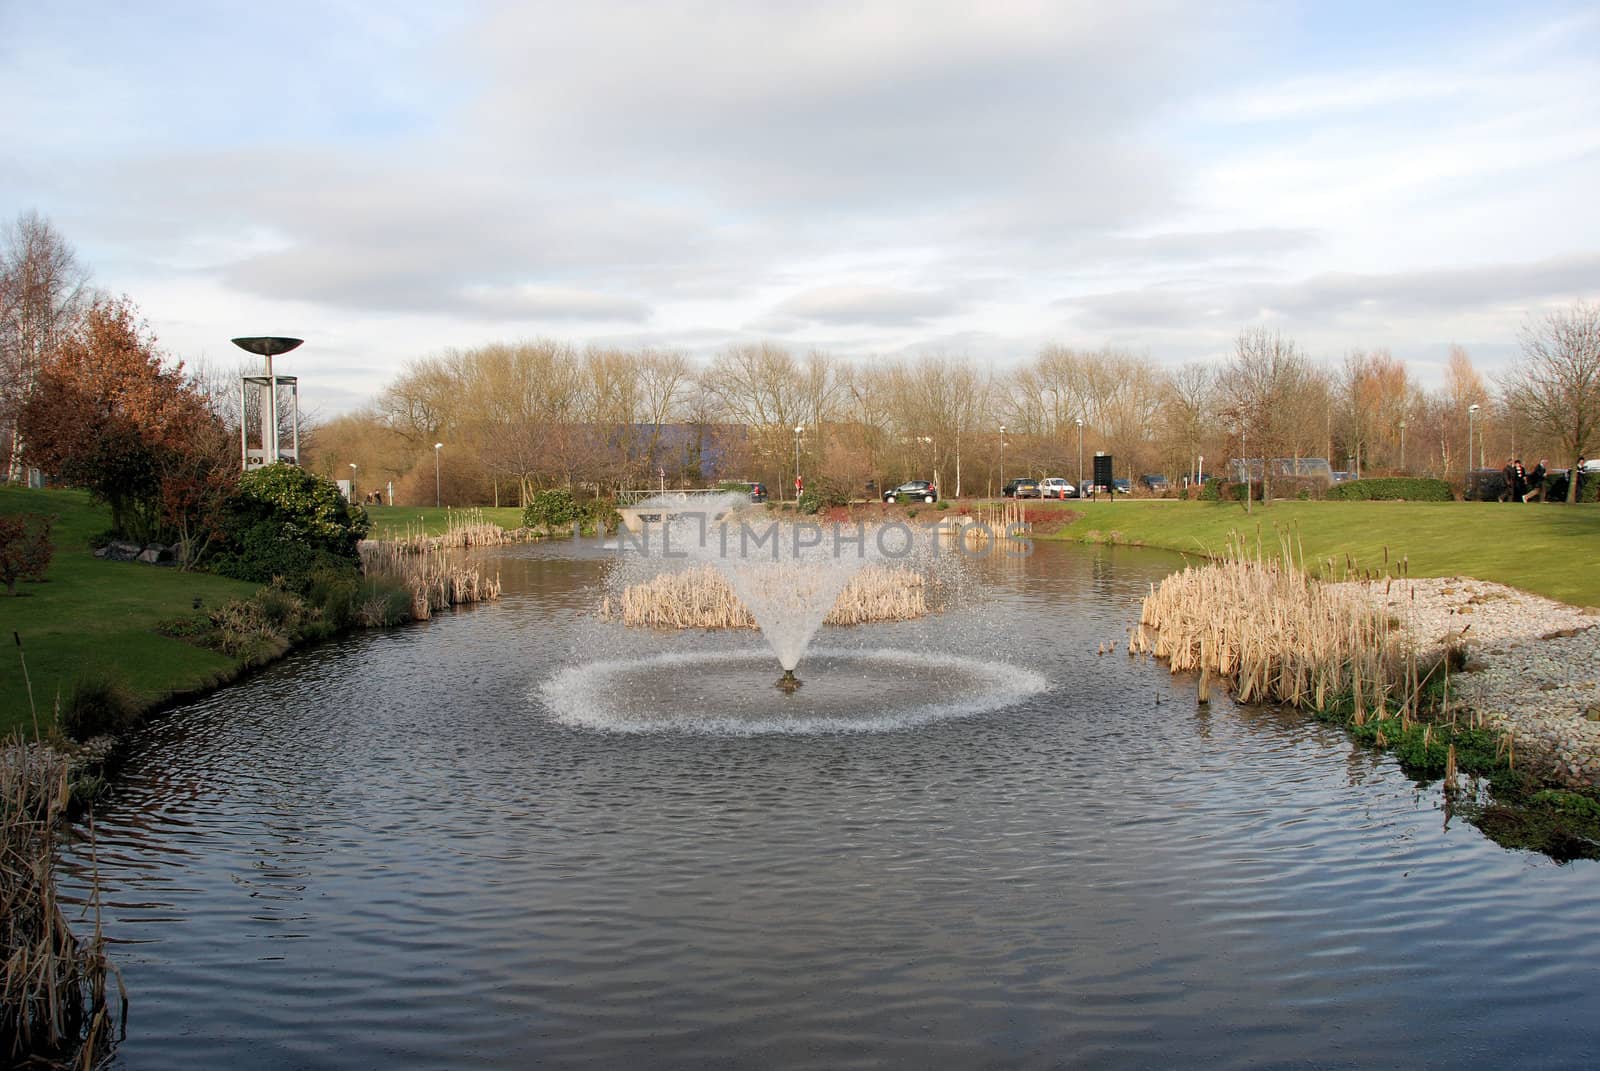 The lake & fountains at holywell park,part of Loughborough university site